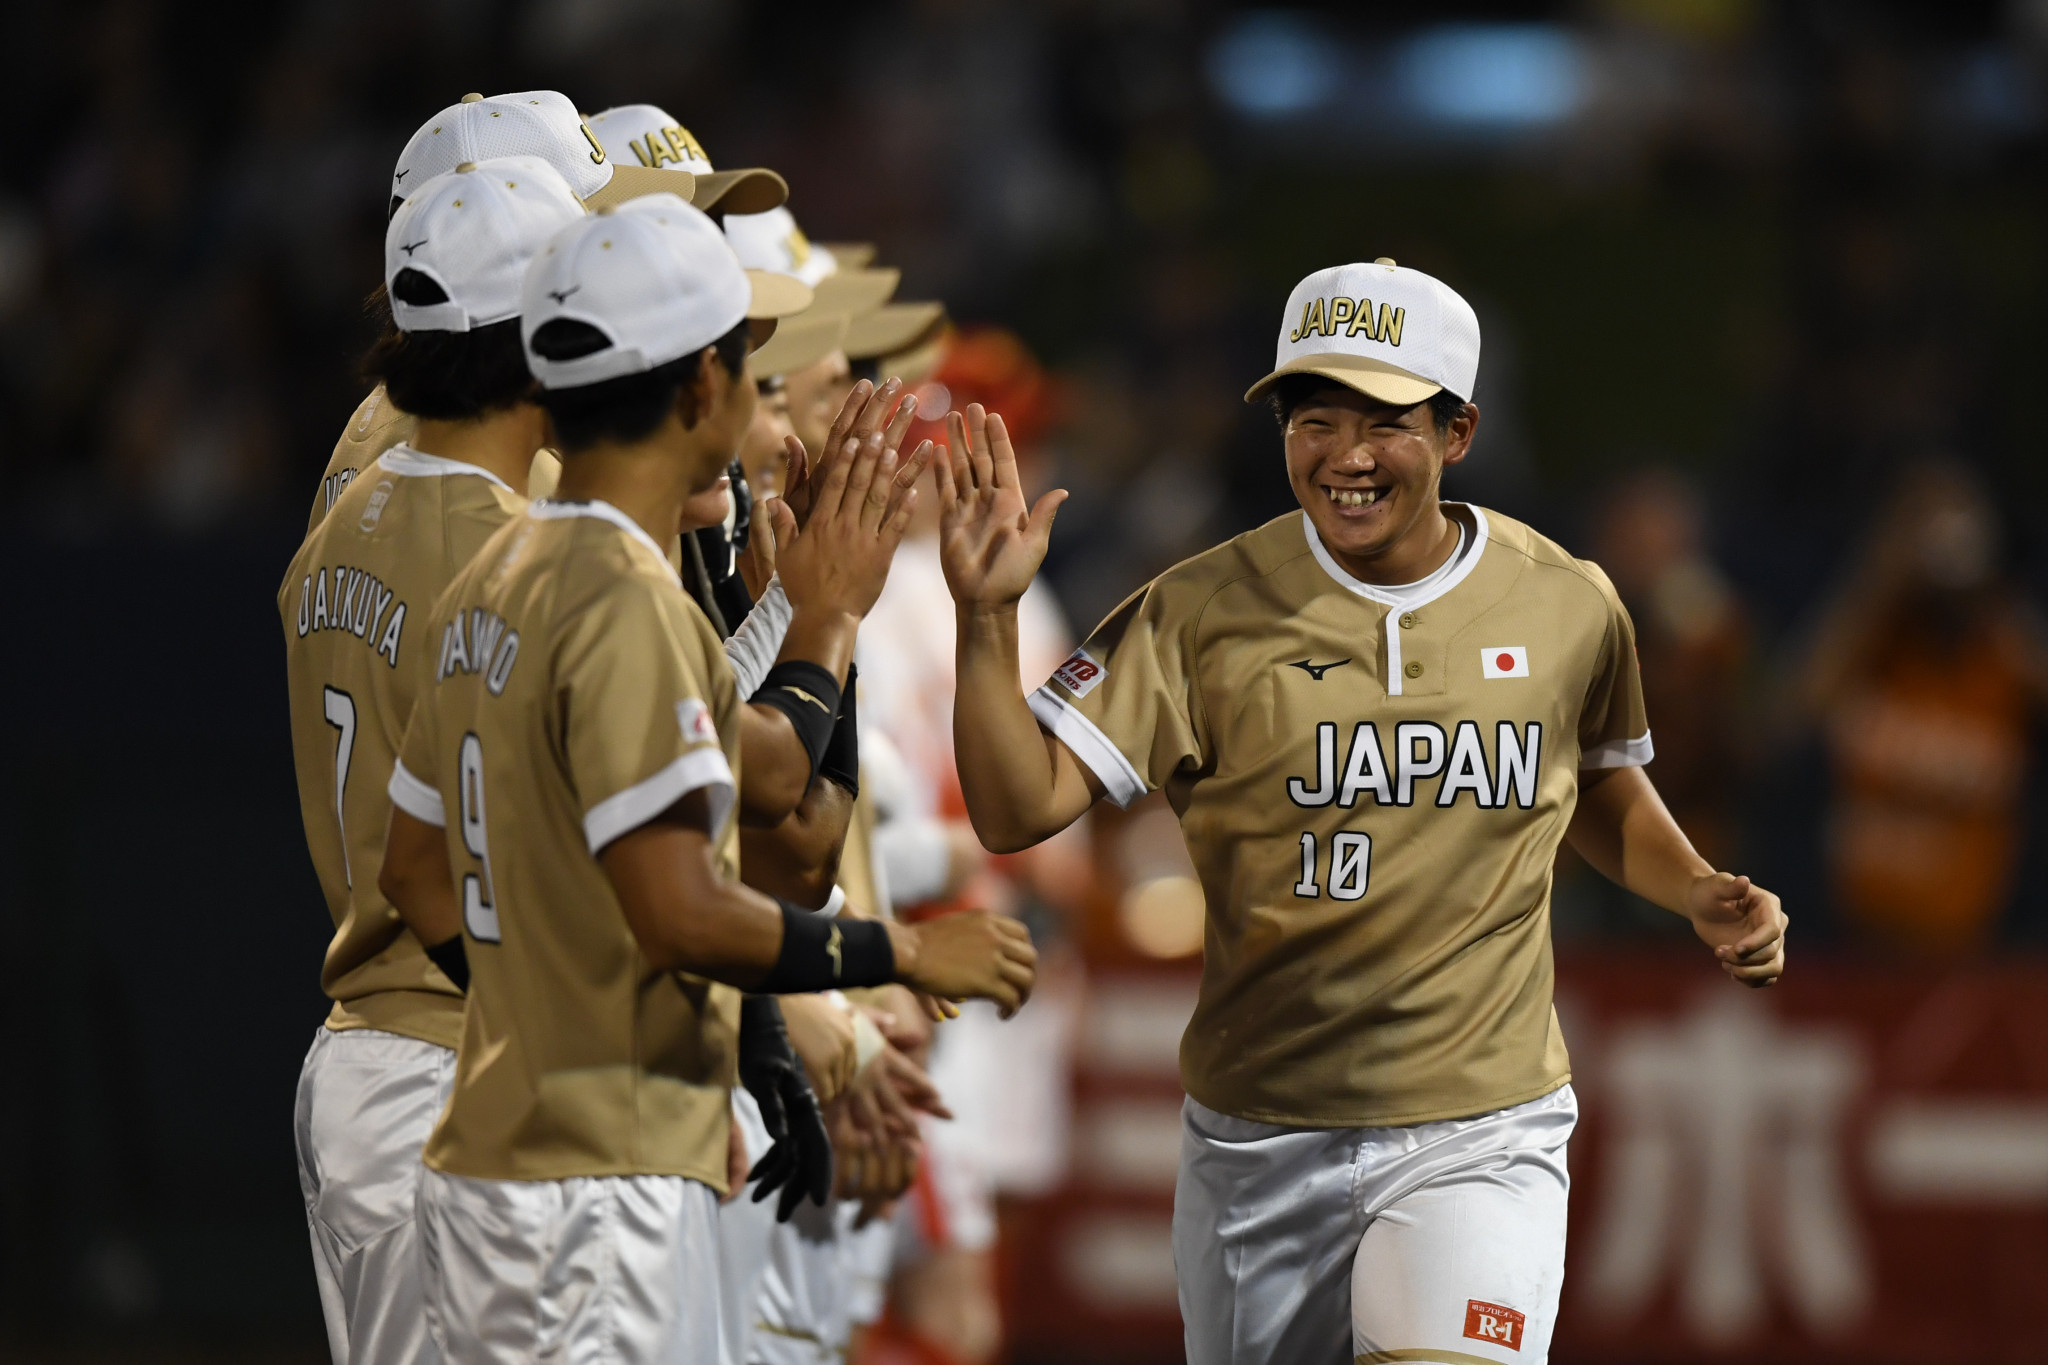 Baseball and softball are due to feature at Tokyo 2020 ©Getty Images